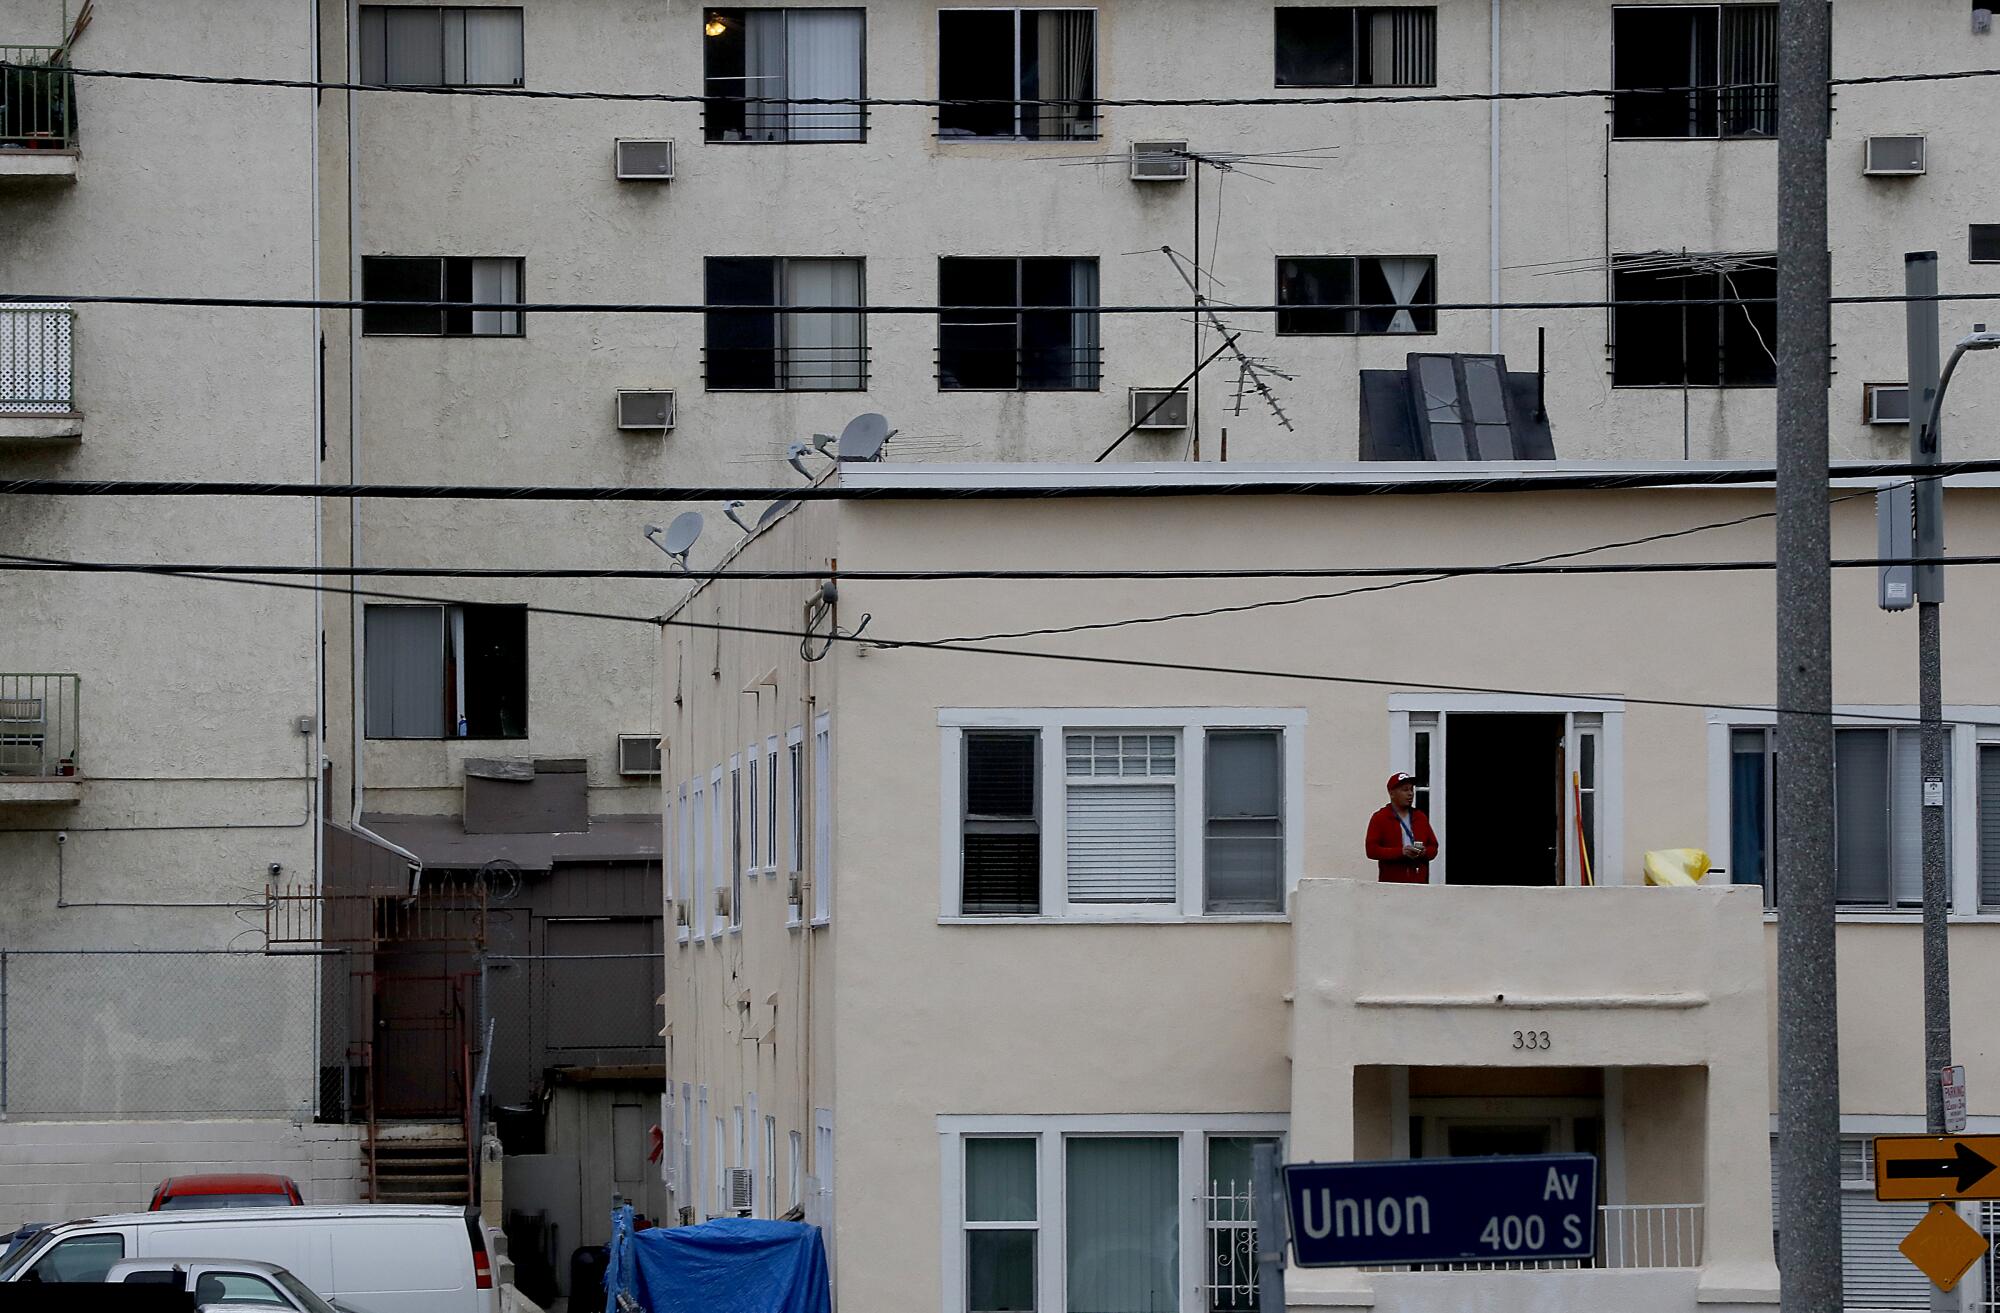 A man stands on a balcony of an apartment building on Union Avenue in the Westlake area of Los Angeles.